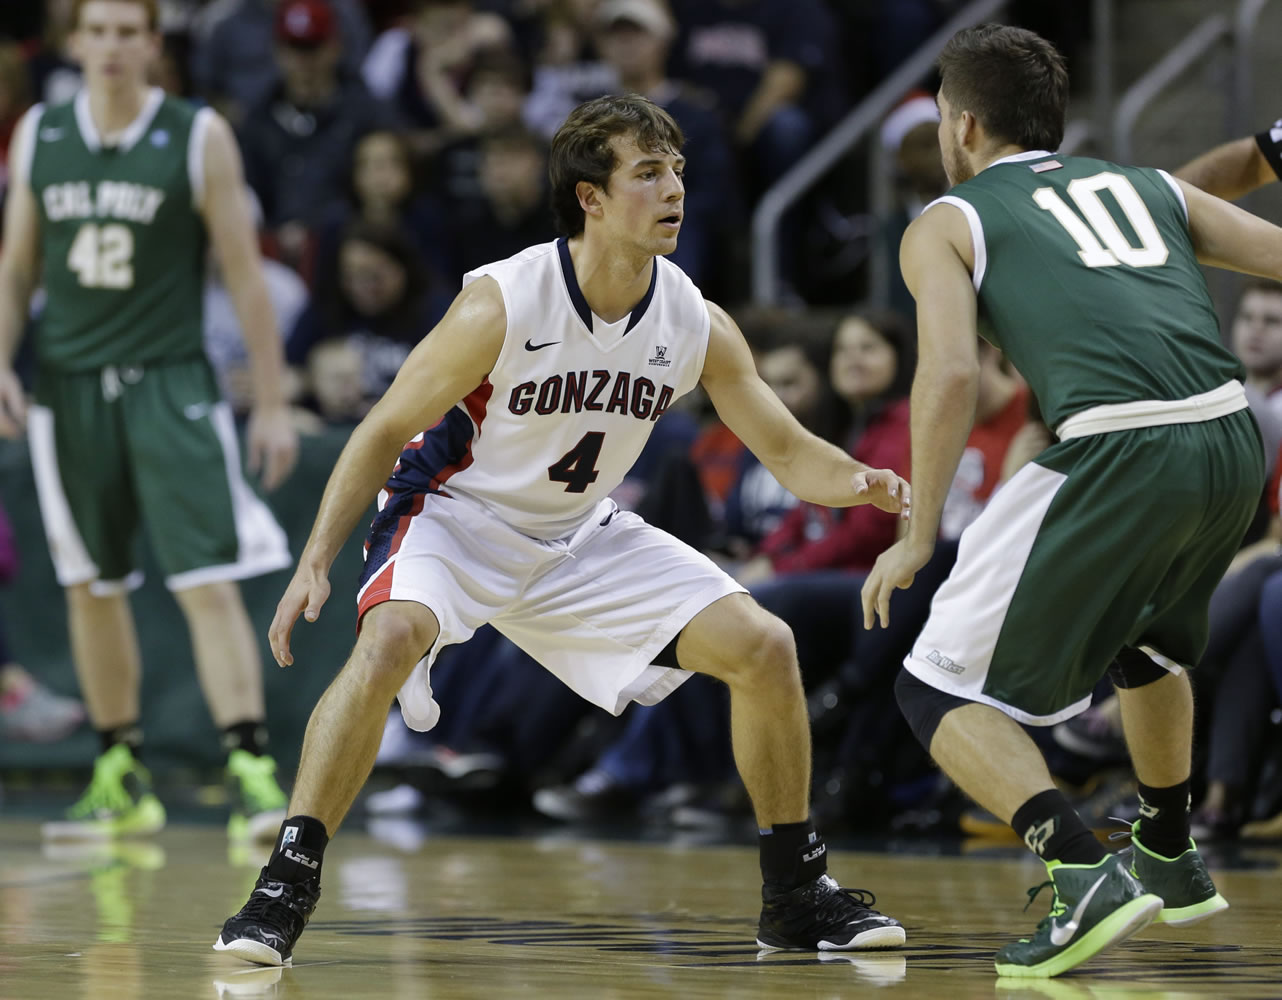 Gonzaga's Kevin Pangos scored 16 points against Cal Poly on Saturday, Dec. 20, 2014, in Seattle.